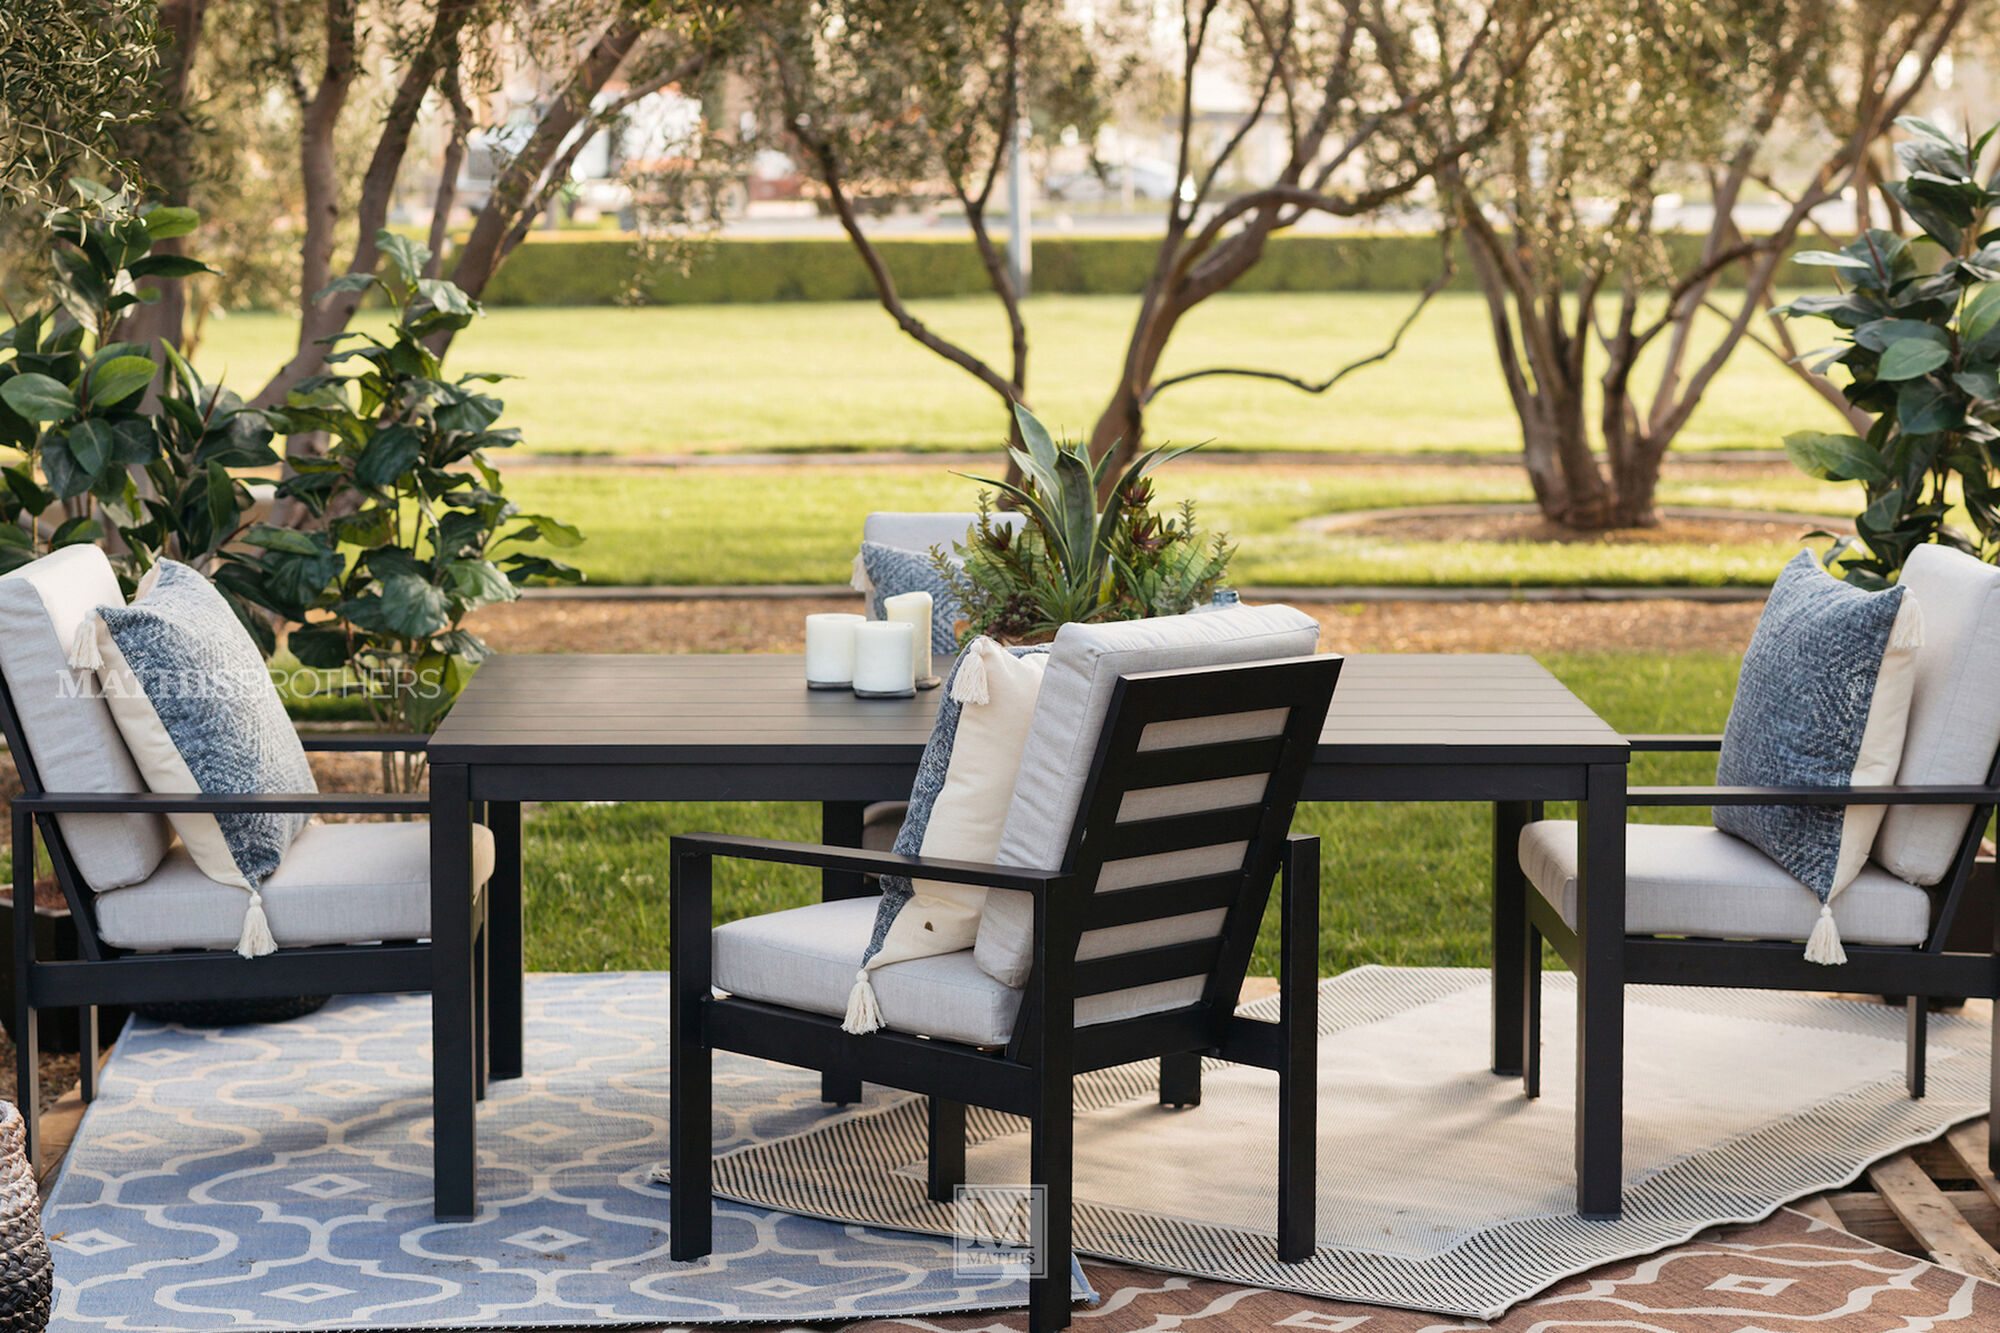 Modern Aluminum Patio Dining Chair in Black | Mathis Brothers Furniture